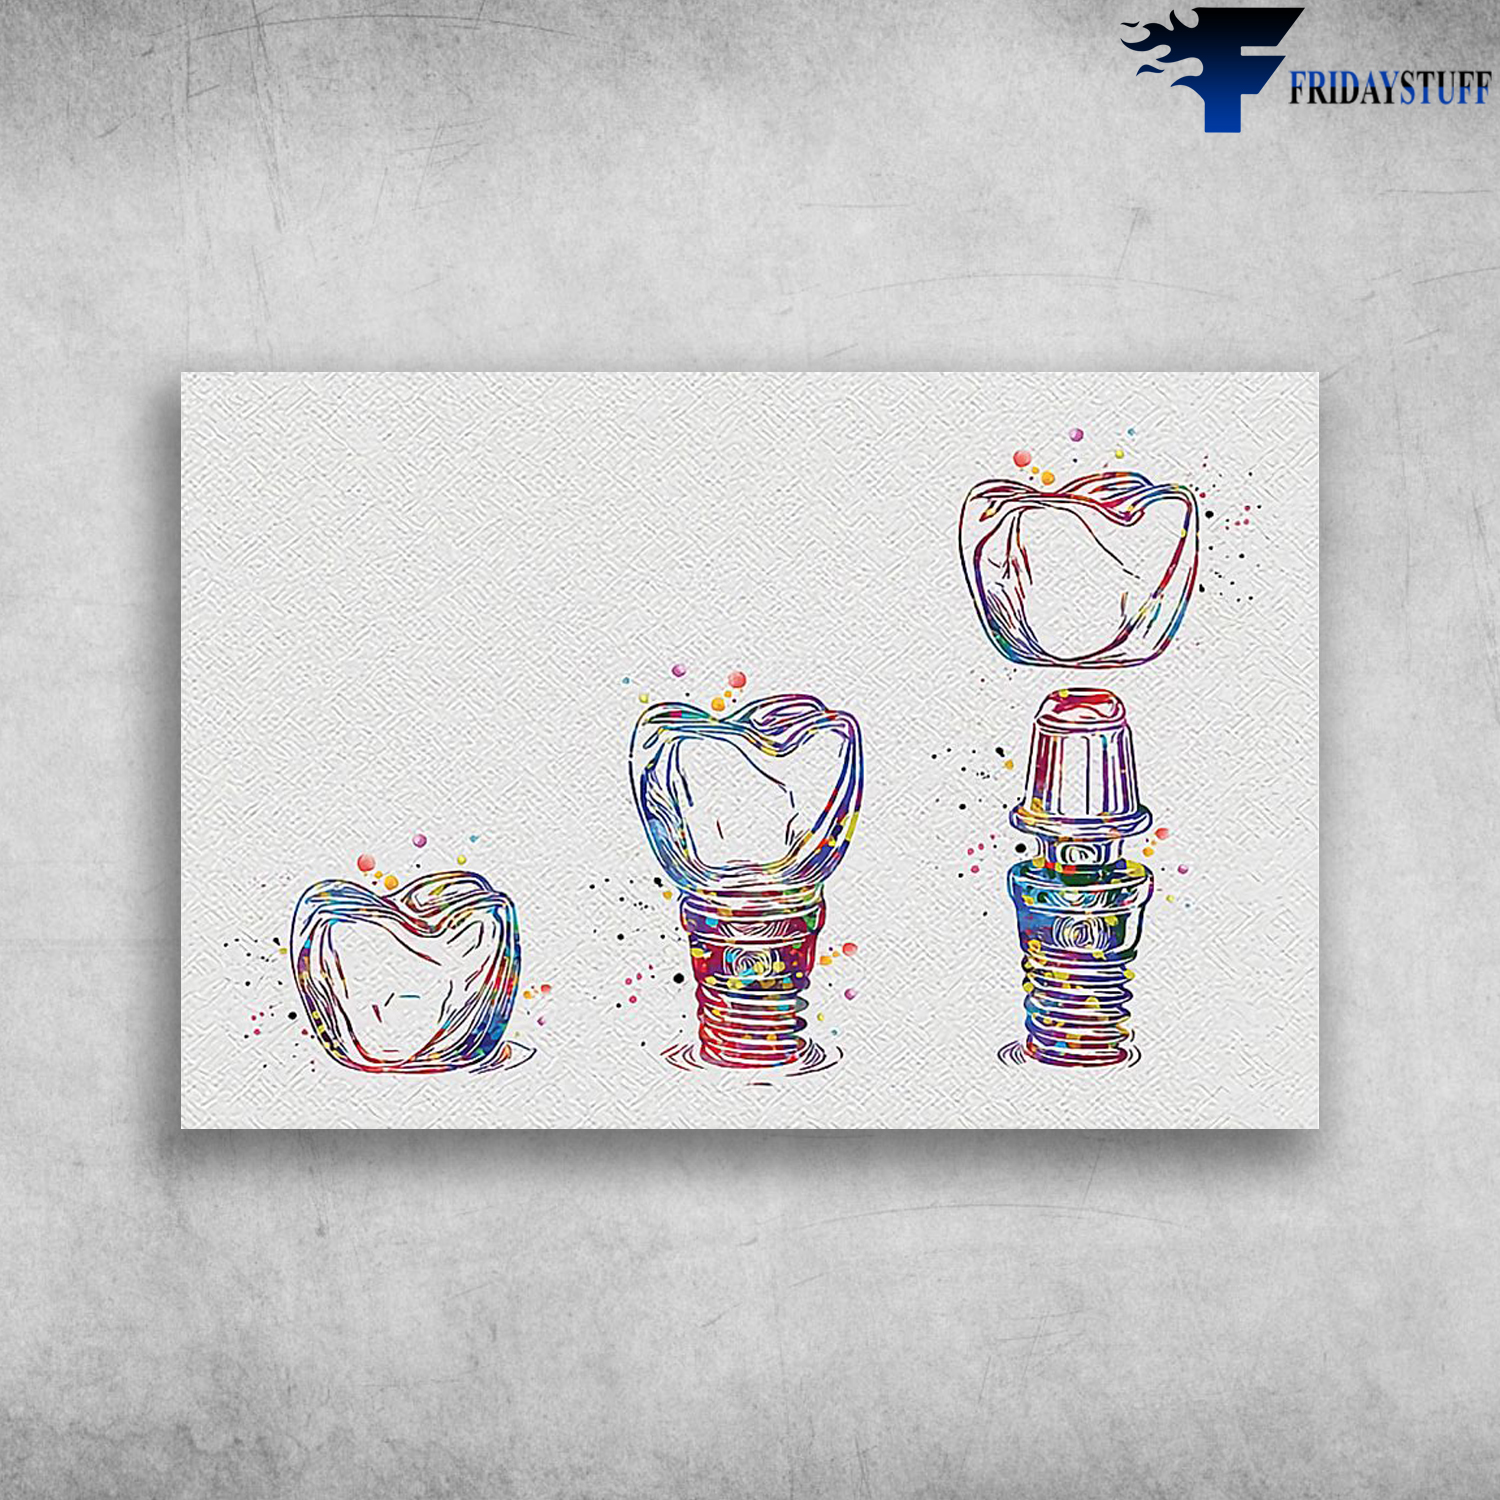 Dentist Implant - The Process Of Implanting A Colorful Denture